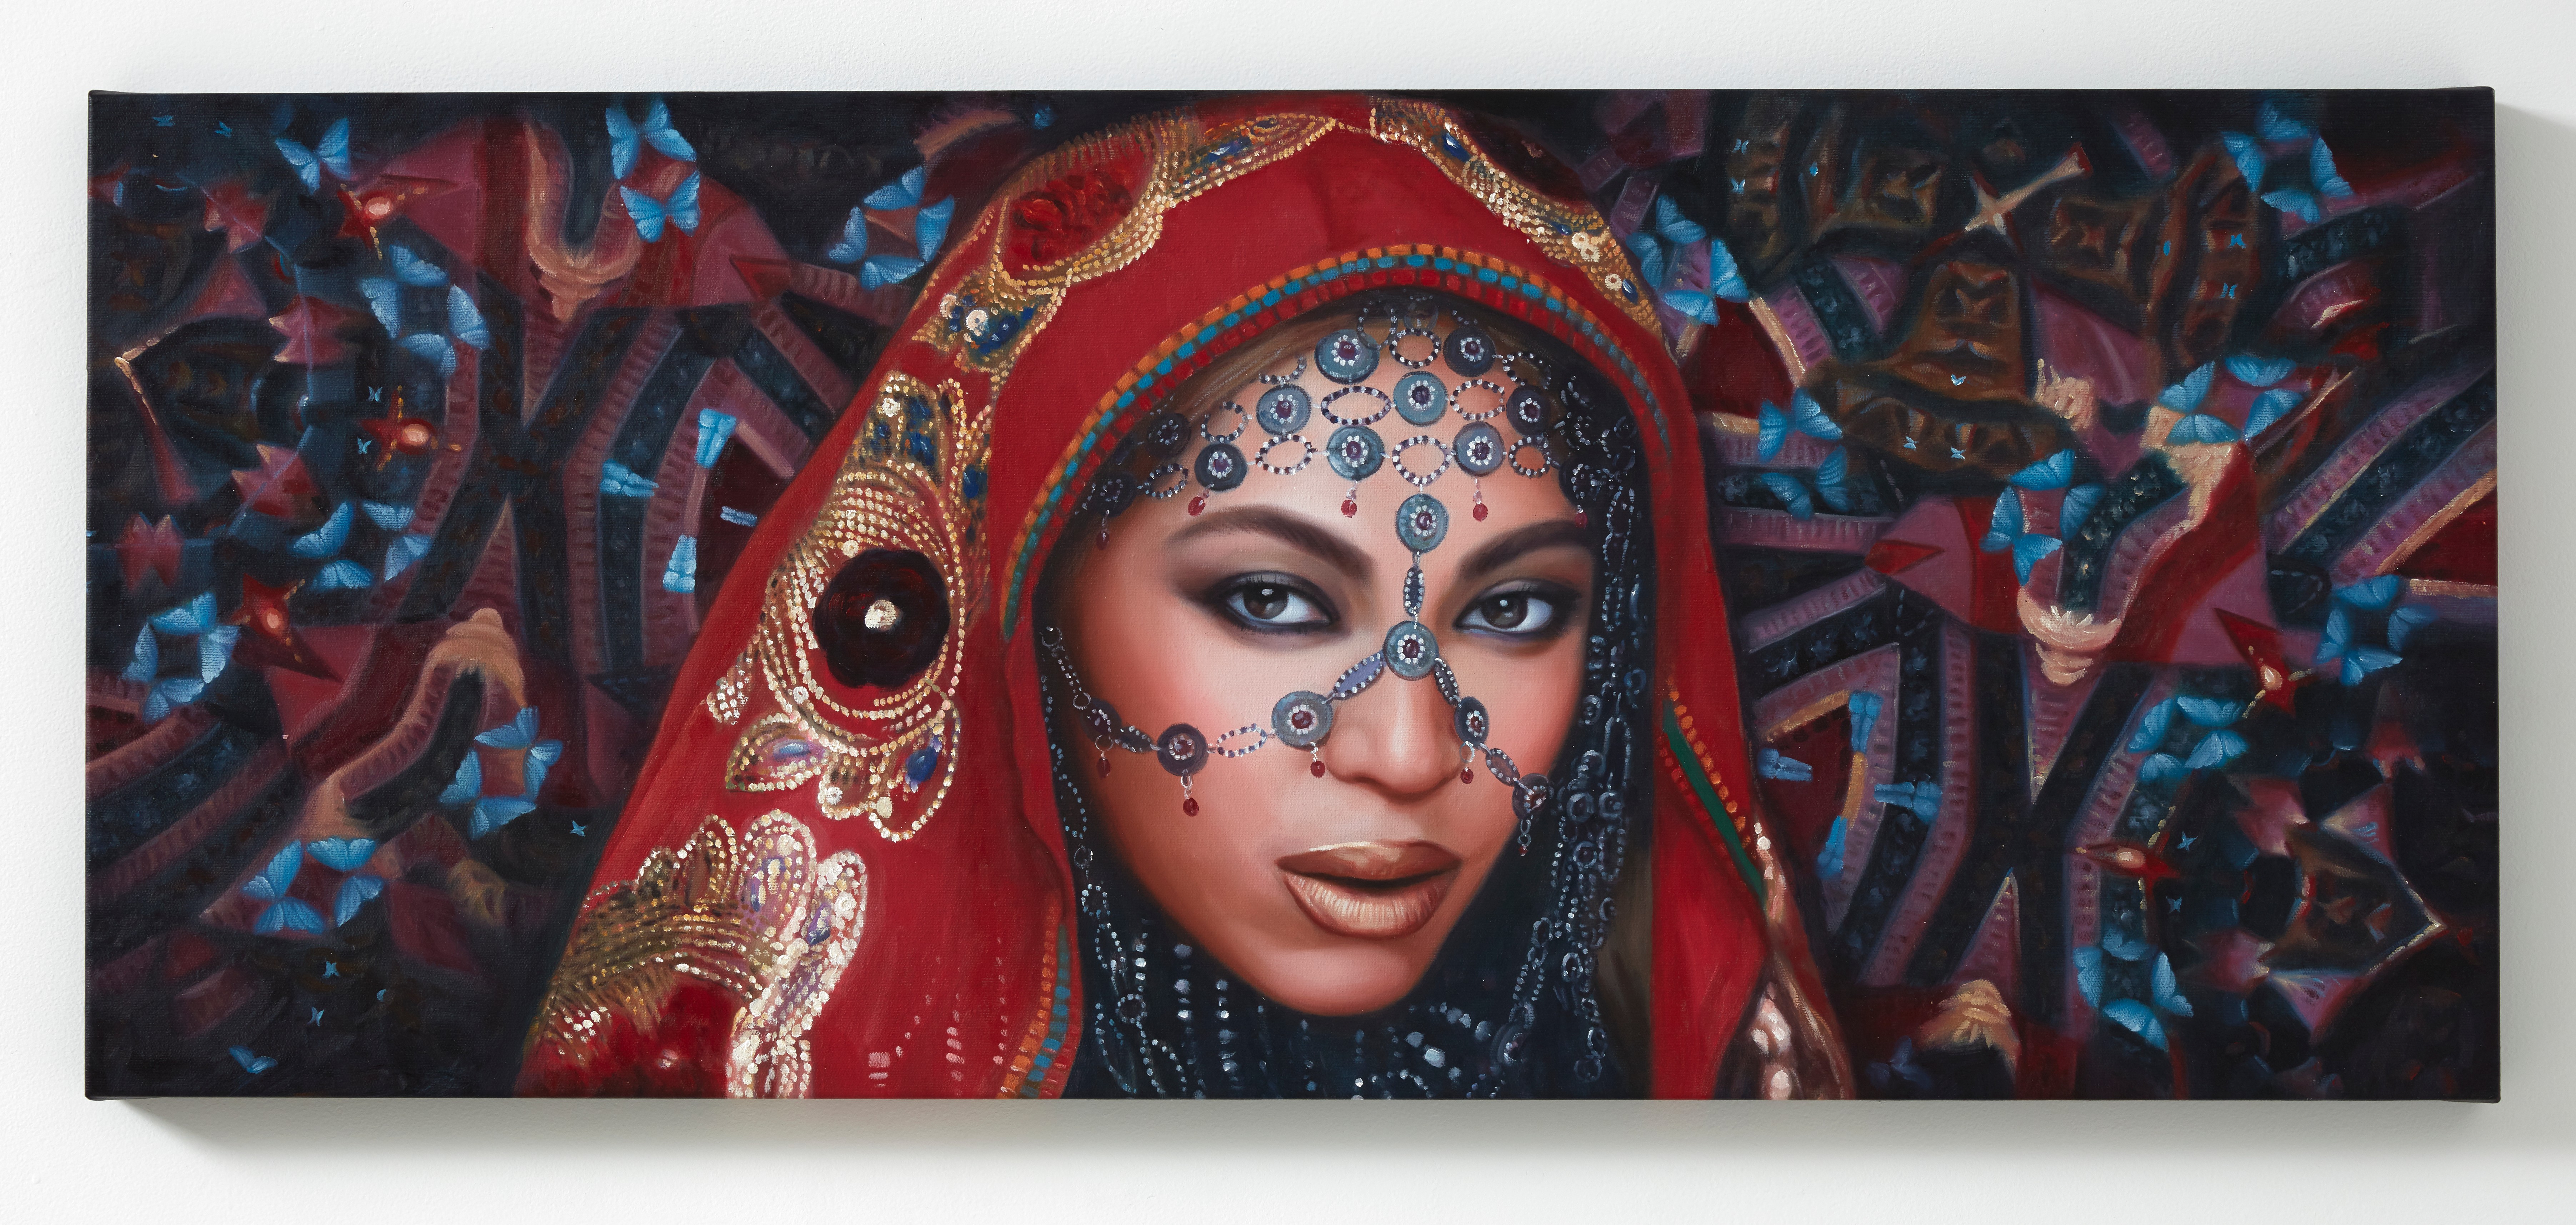 Painting of Beyonce in an Indian head covering